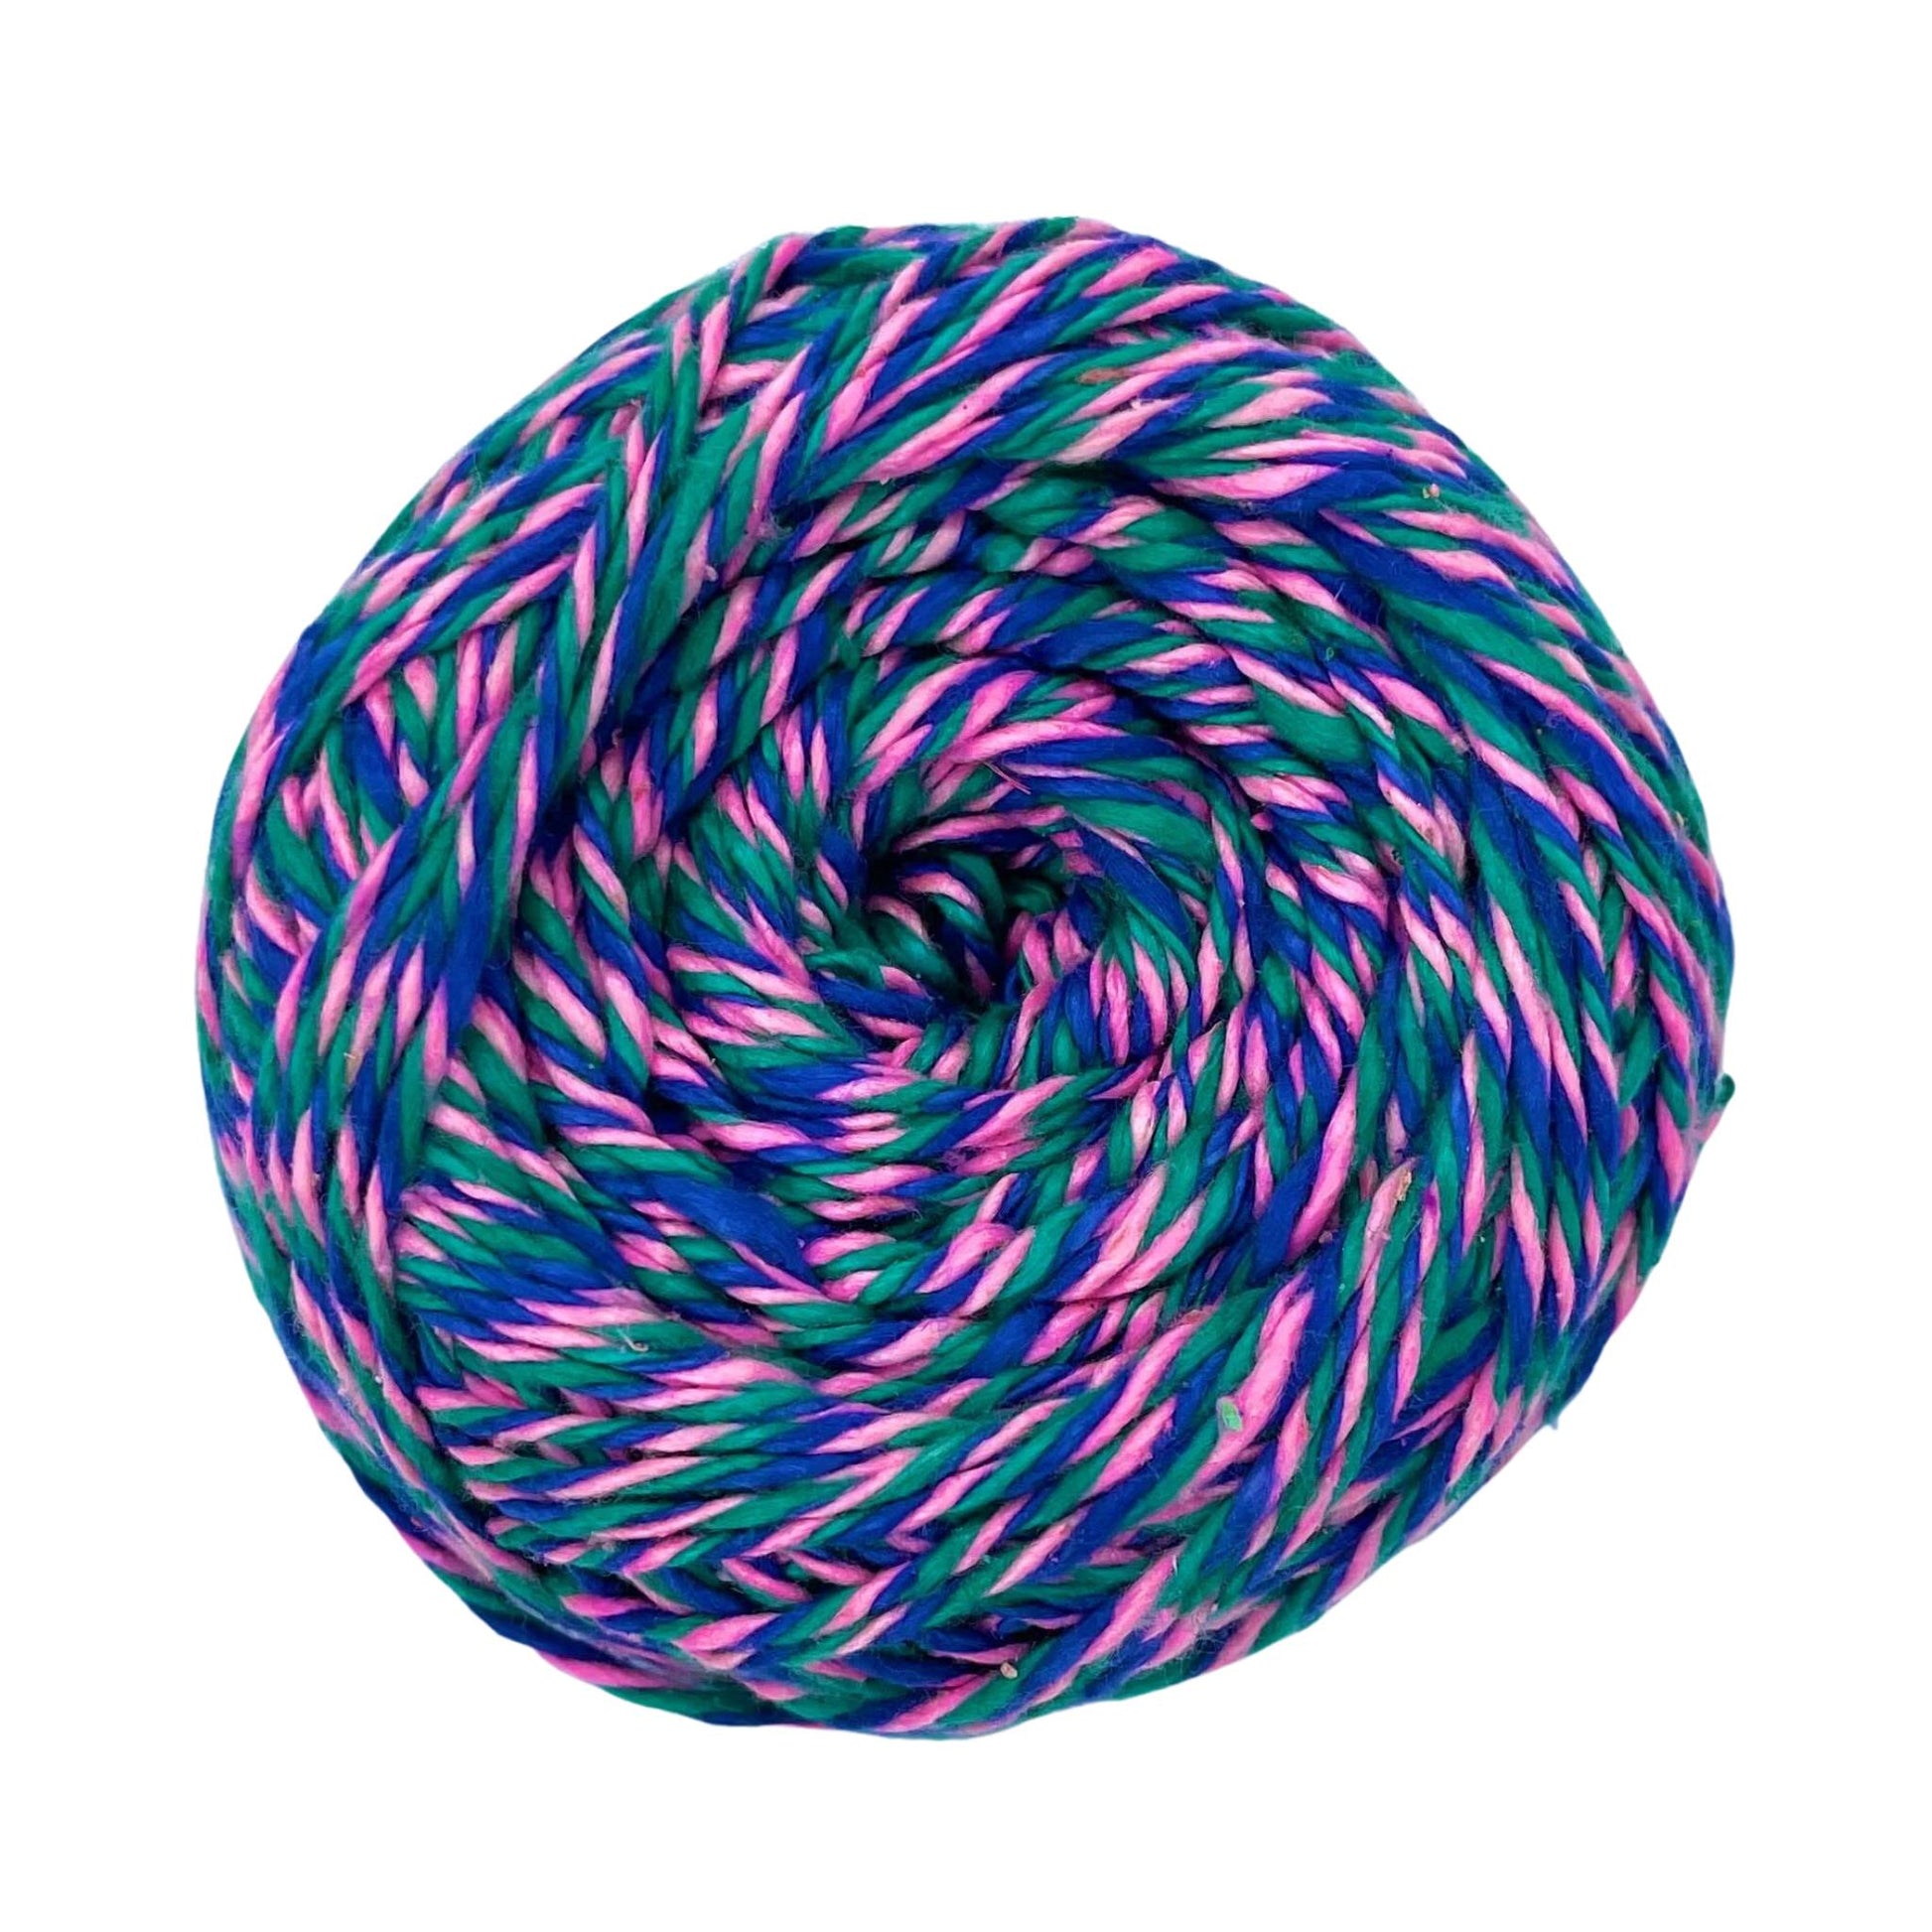 A skein of reclaimed silk yarn on a white background. The yarn is a triple ply yarn with pink, green and navy colors.